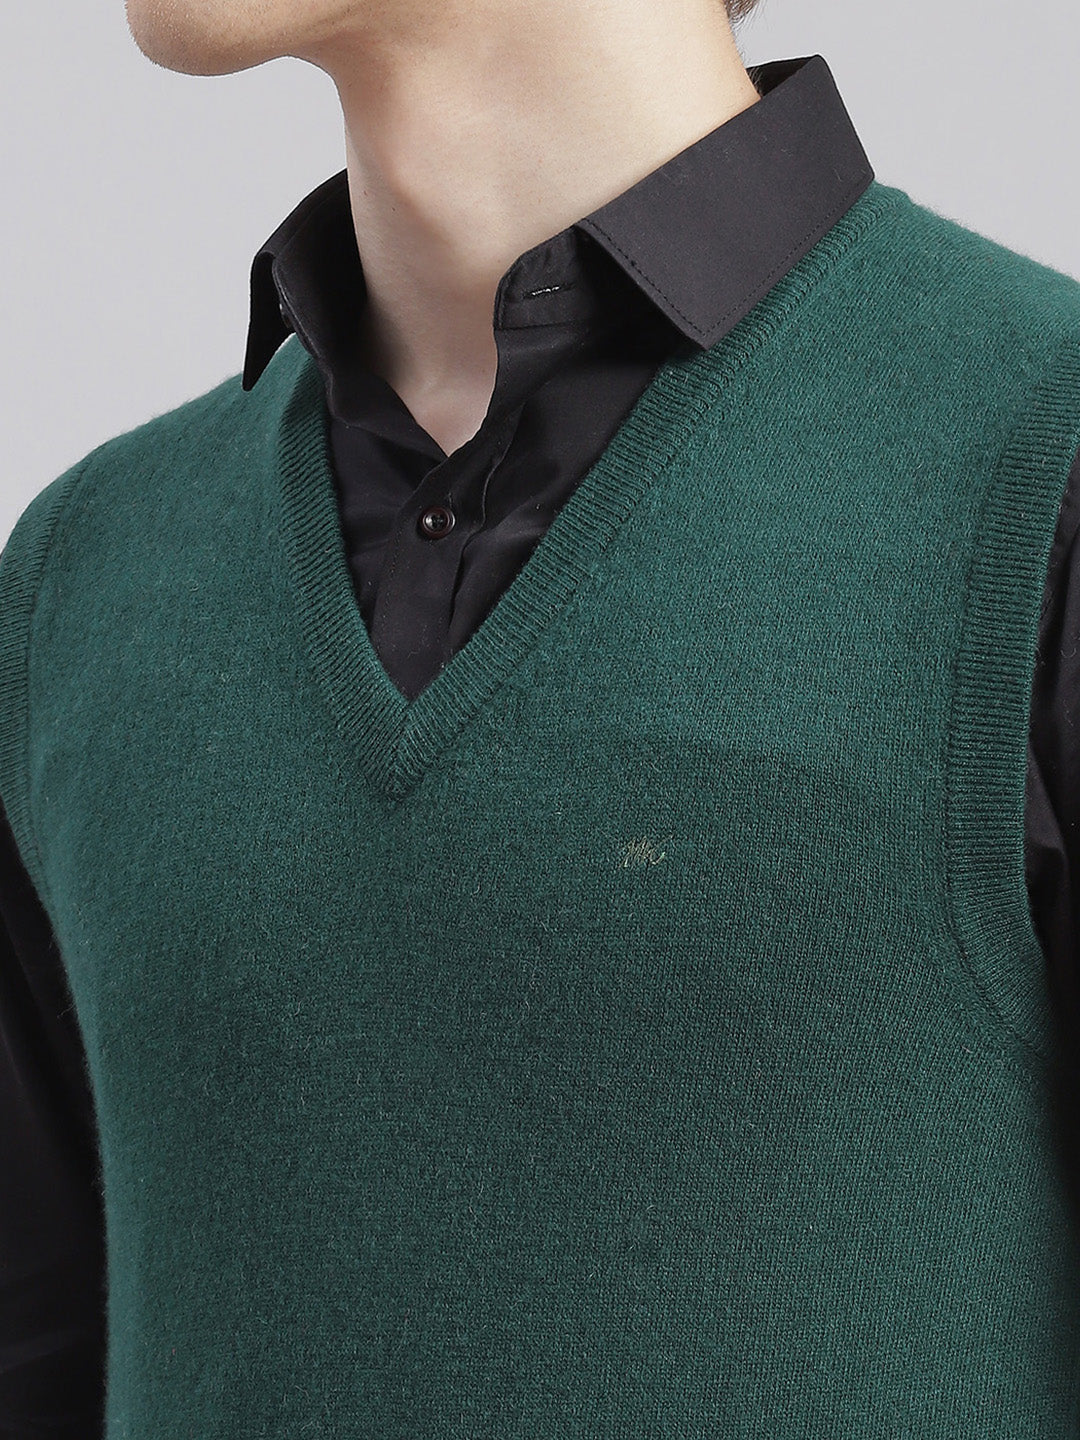 Men Green Solid V Neck Sleeveless Sweaters/Pullovers